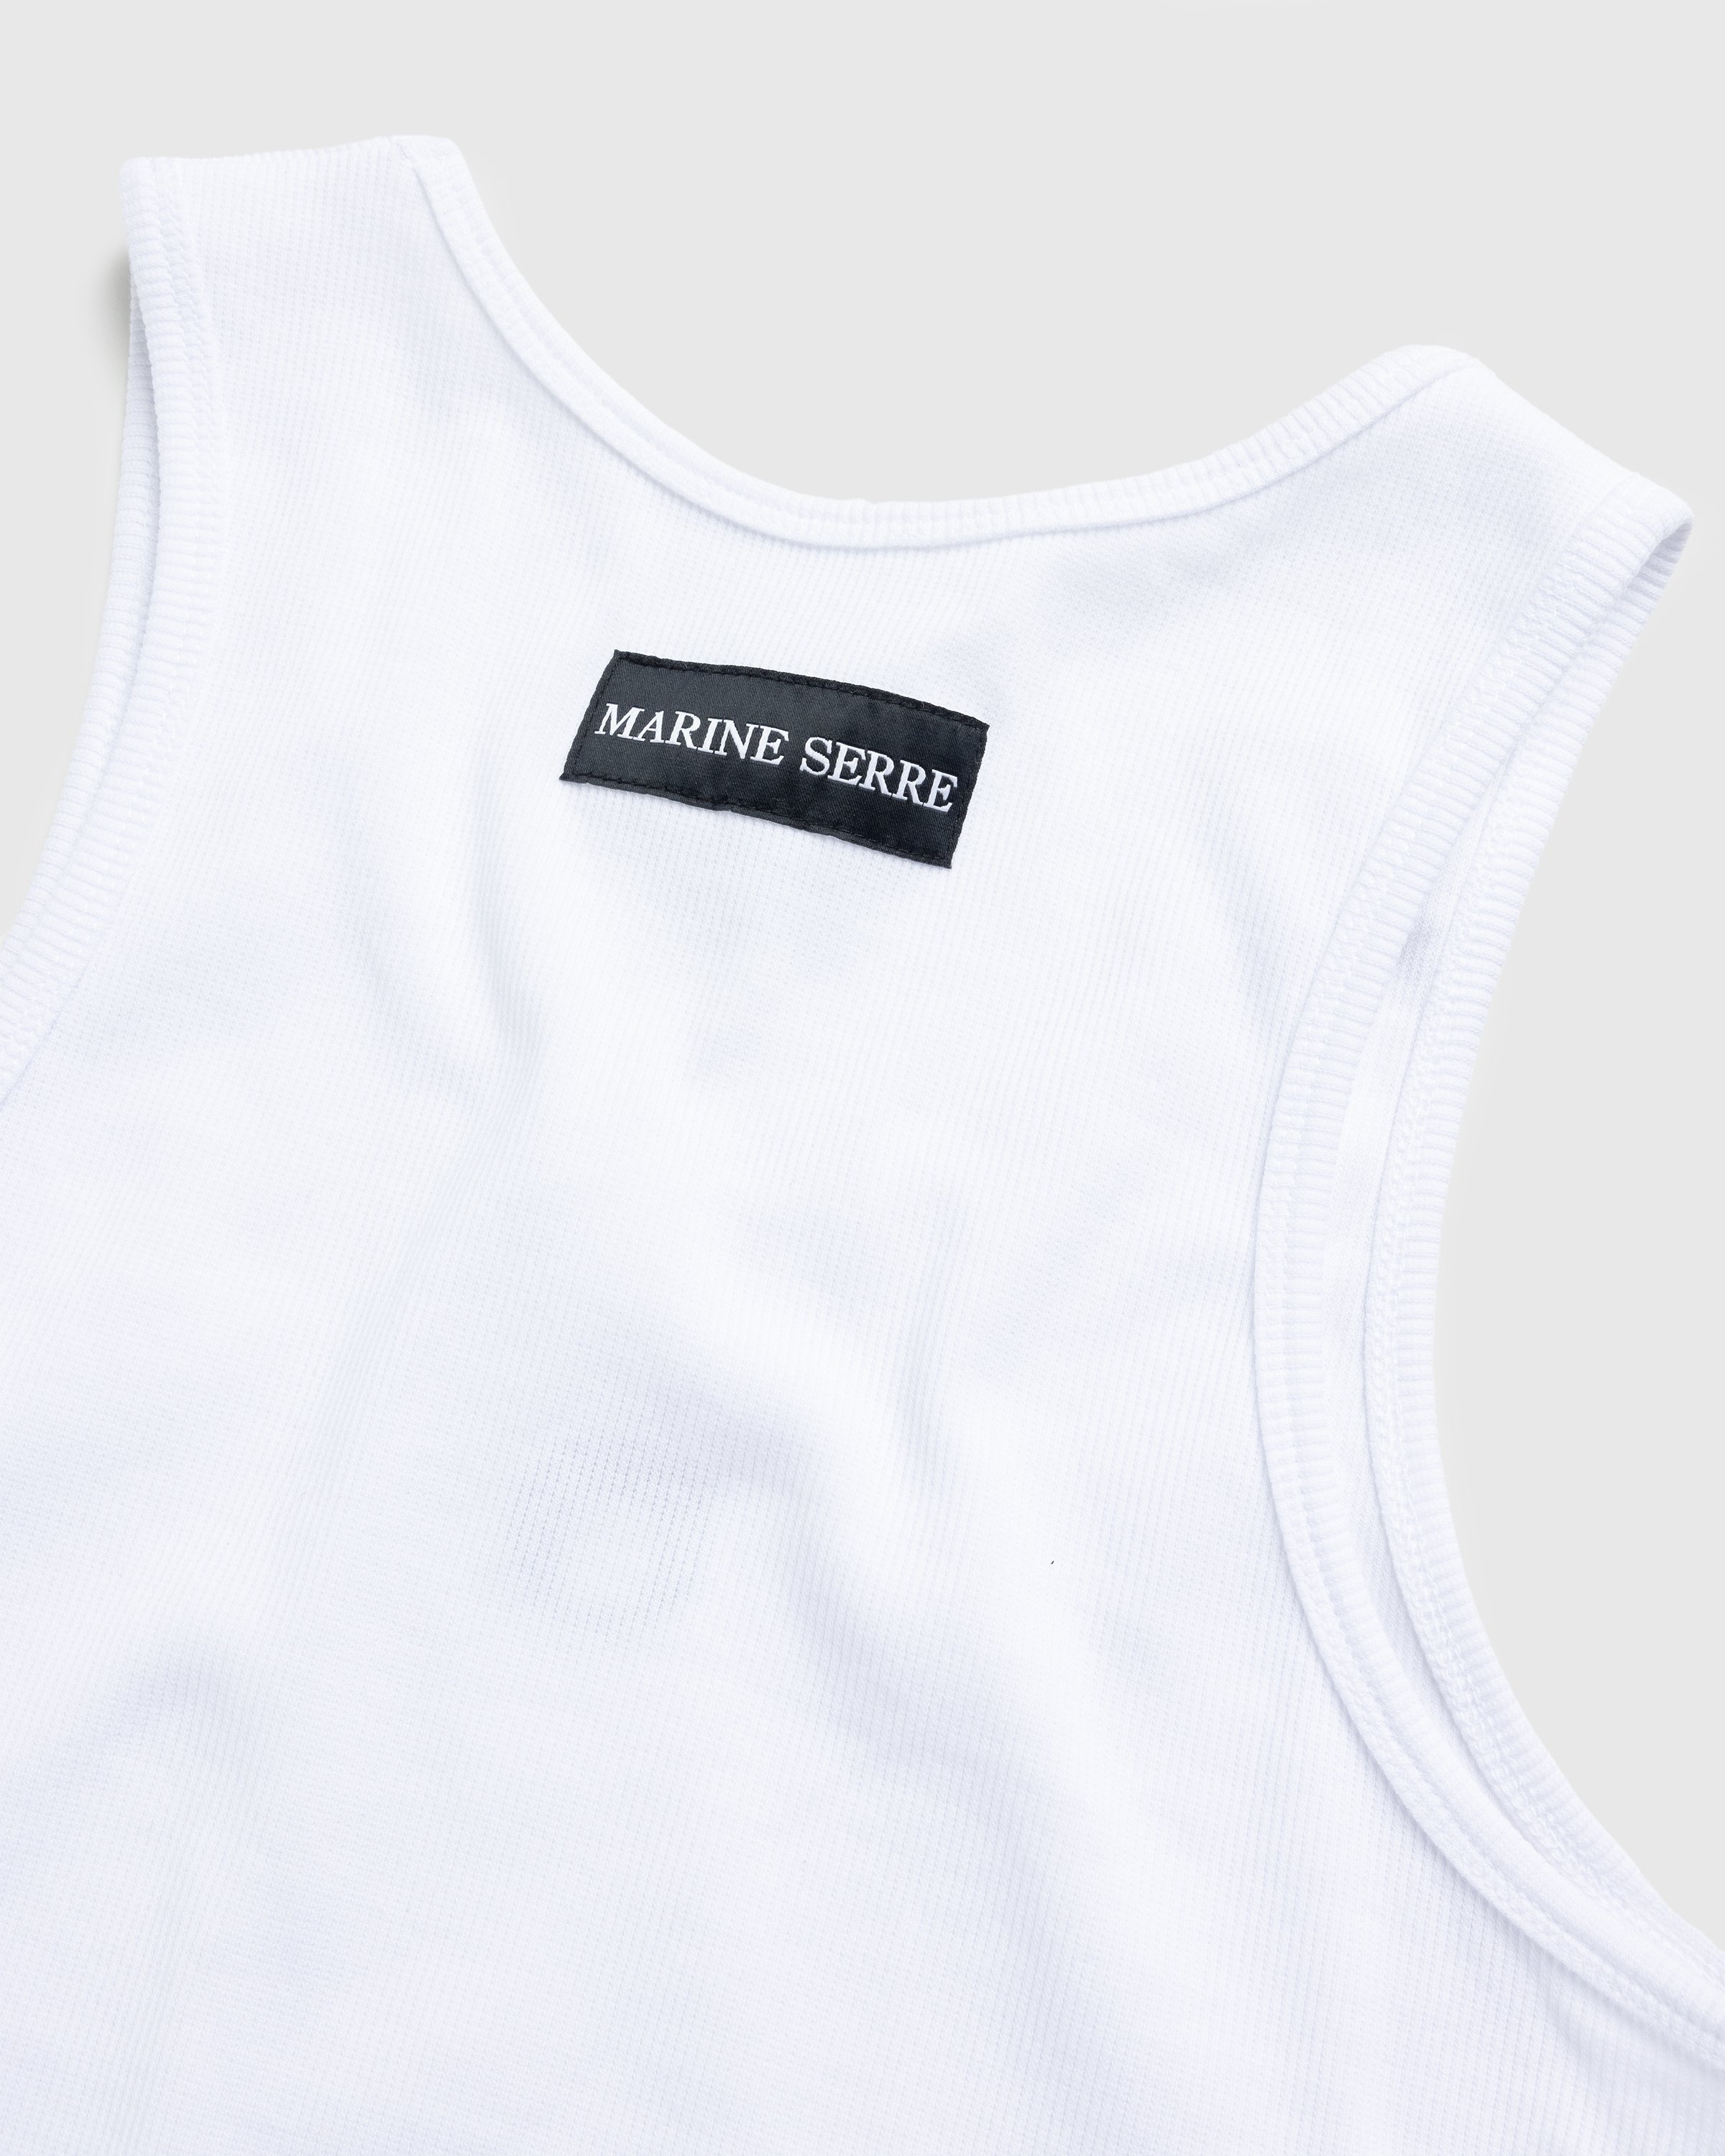 Marine Serre – Organic Cotton Fitted Tank Top White - Tops - White - Image 6